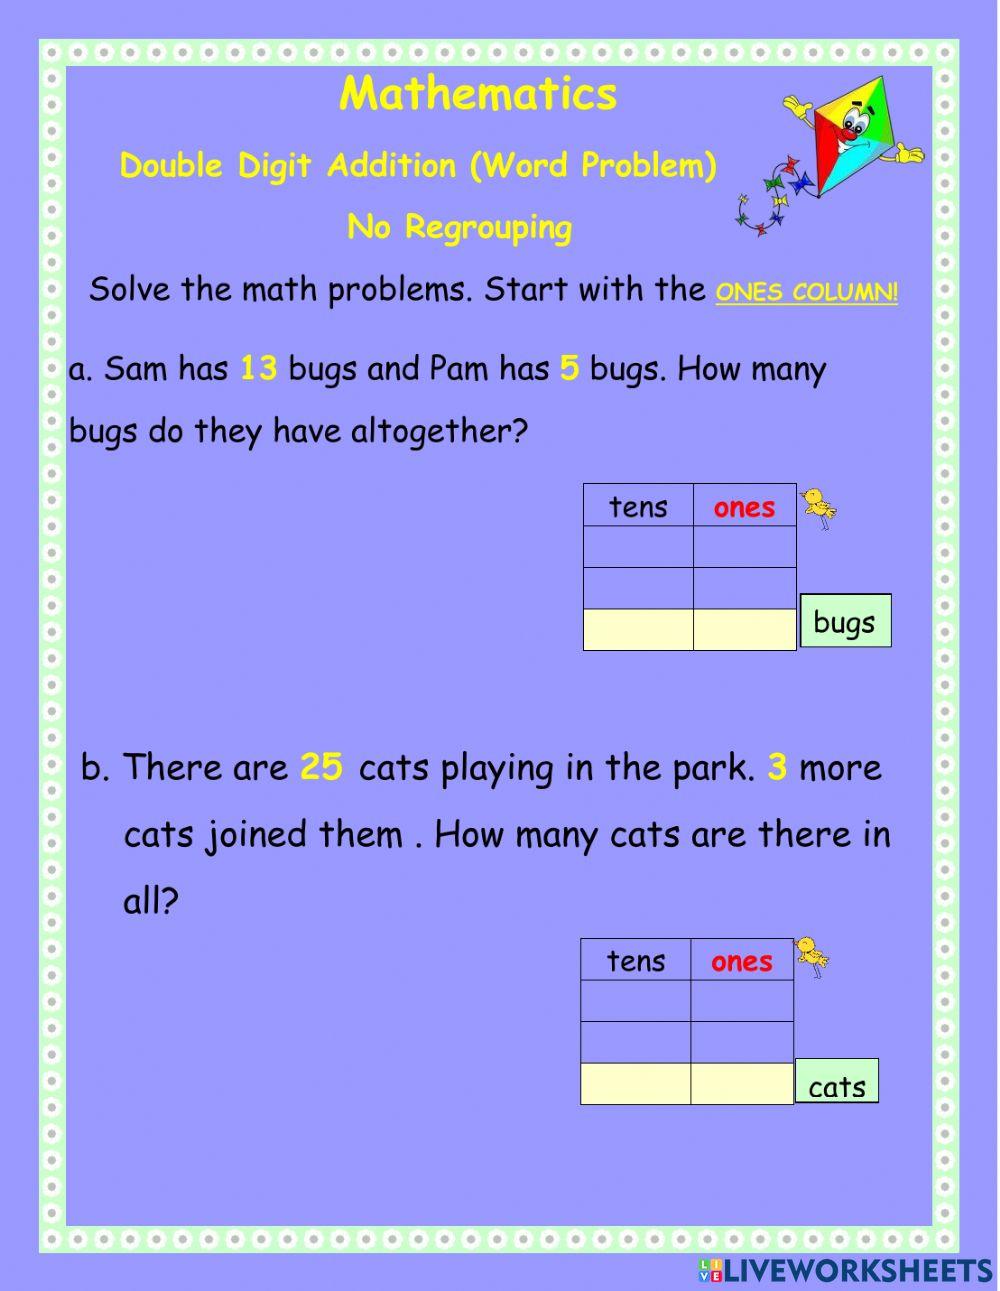 Double digit addition -word problem